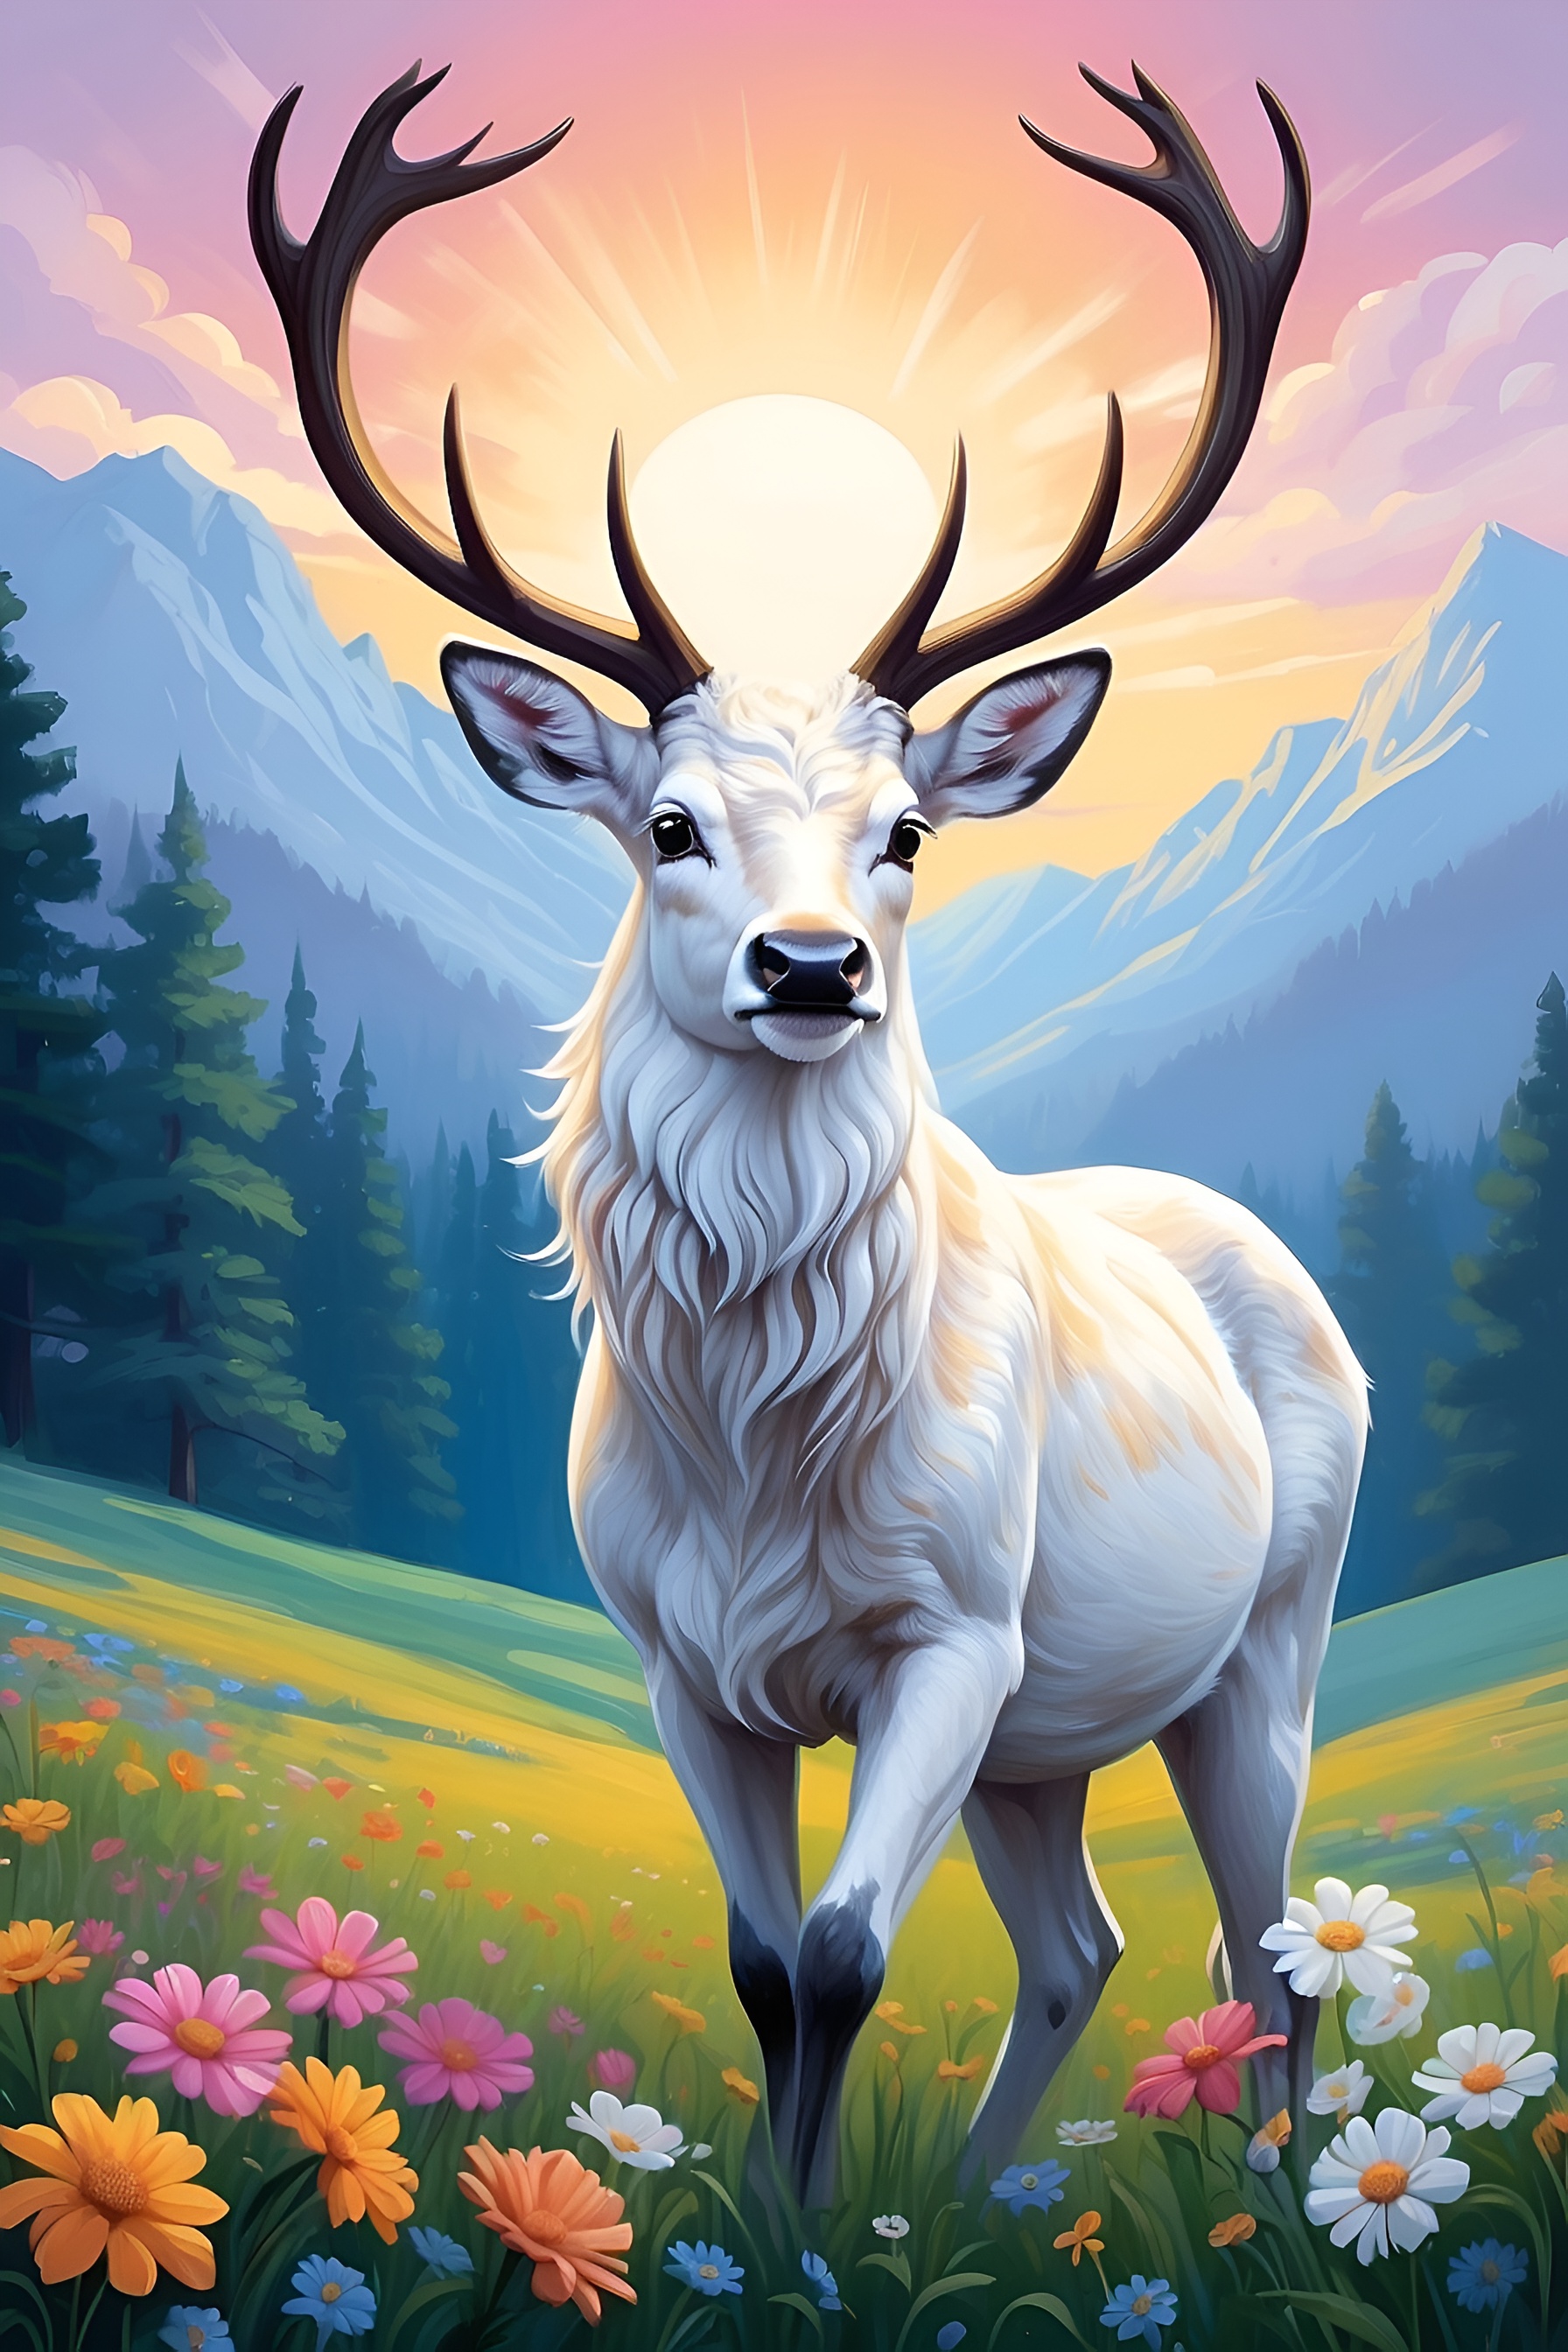 Default_oilpainting_a_cute_white_stag_in_a_beautiful_meadow_wi_3_068f0a90-e871-4b80-8c33-760bad4384cc_1.jpg